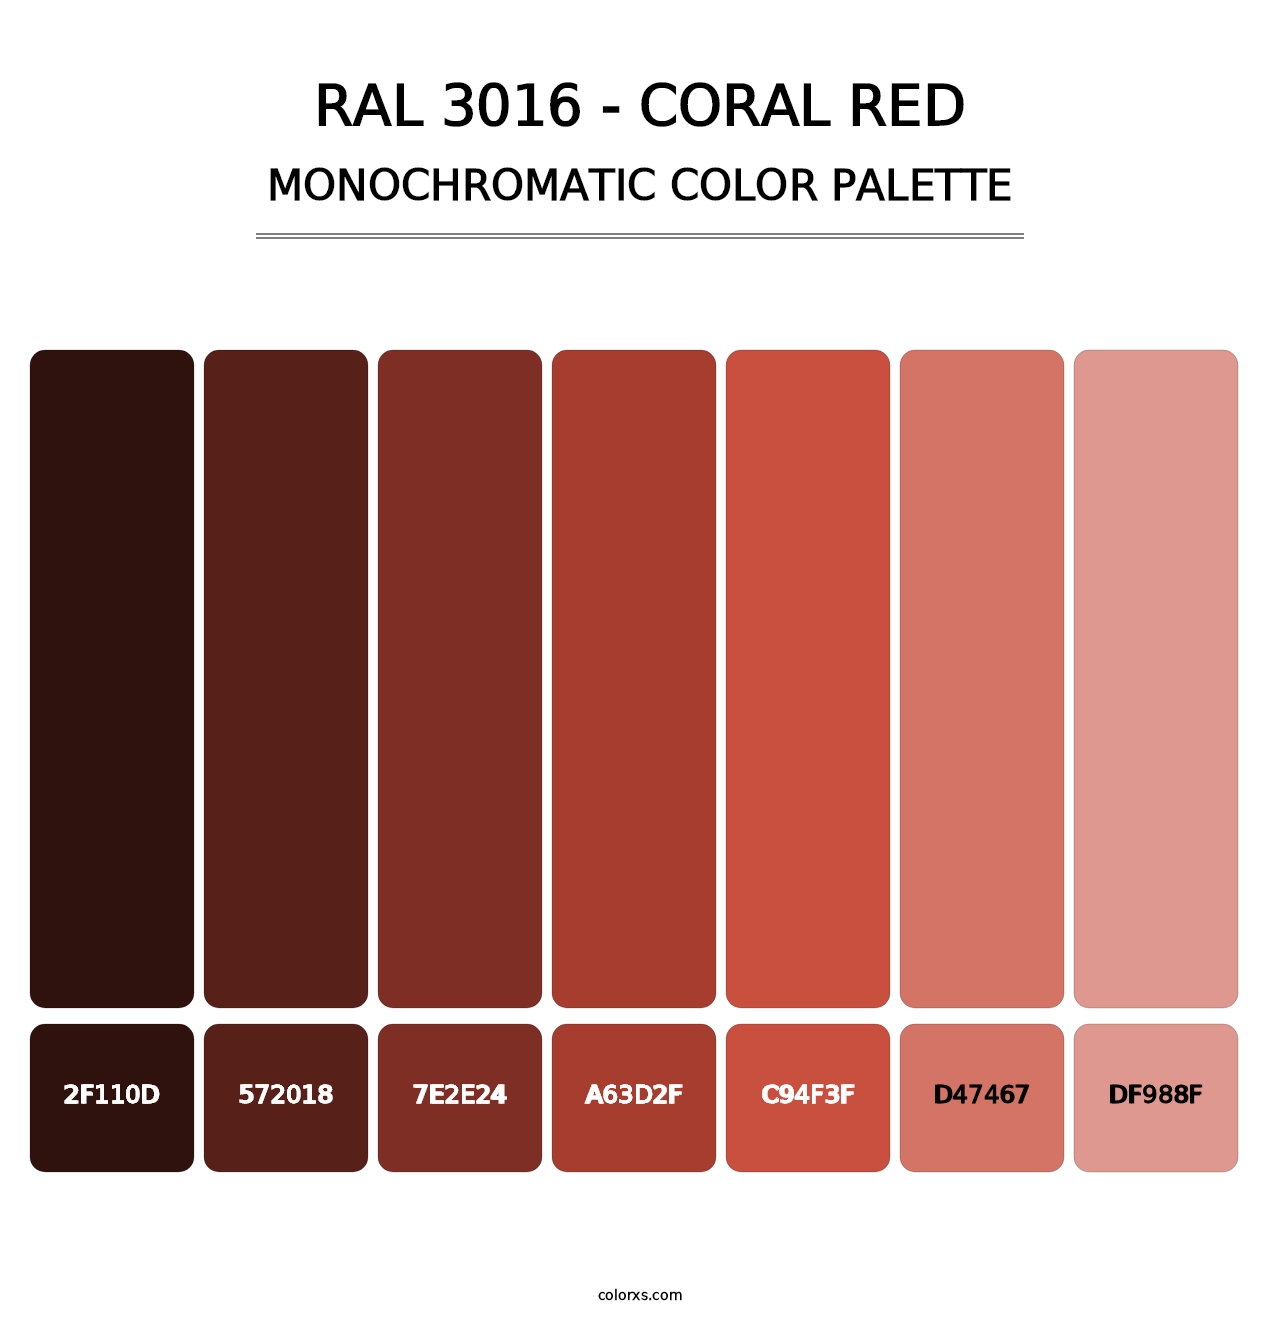 RAL 3016 - Coral Red - Monochromatic Color Palette